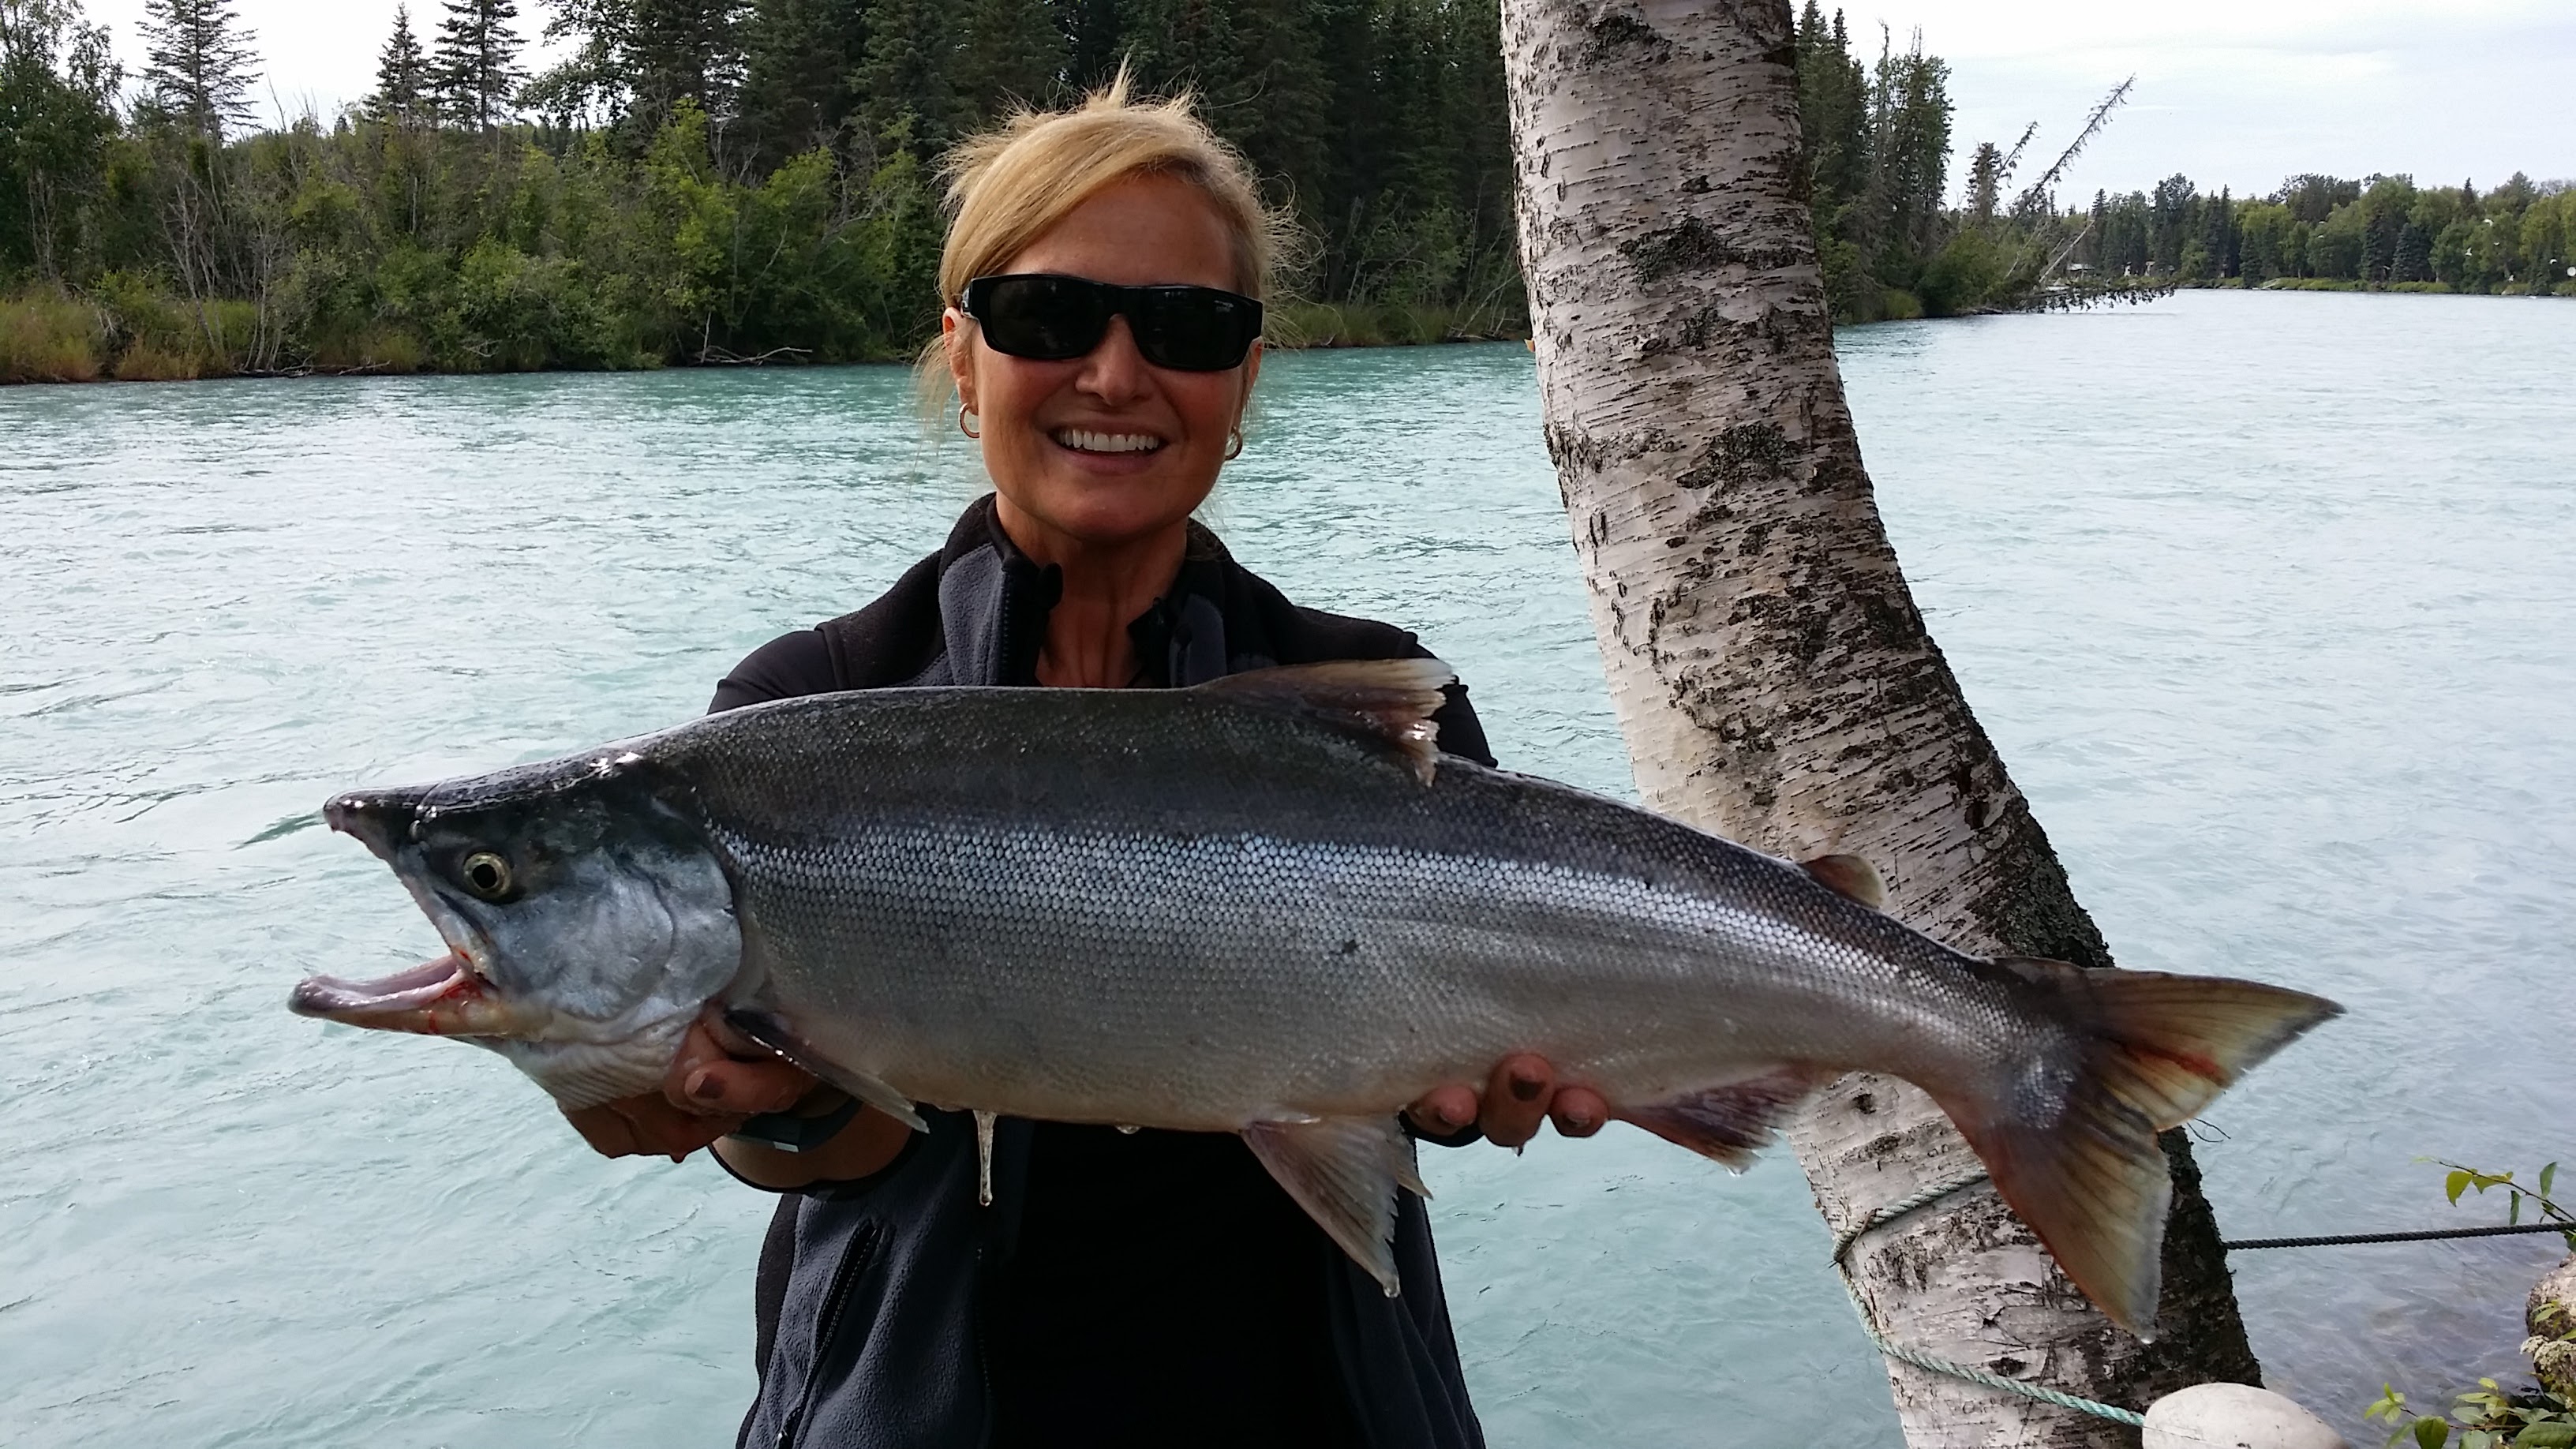 Cindy with a beautiful 2015 Red Salmon